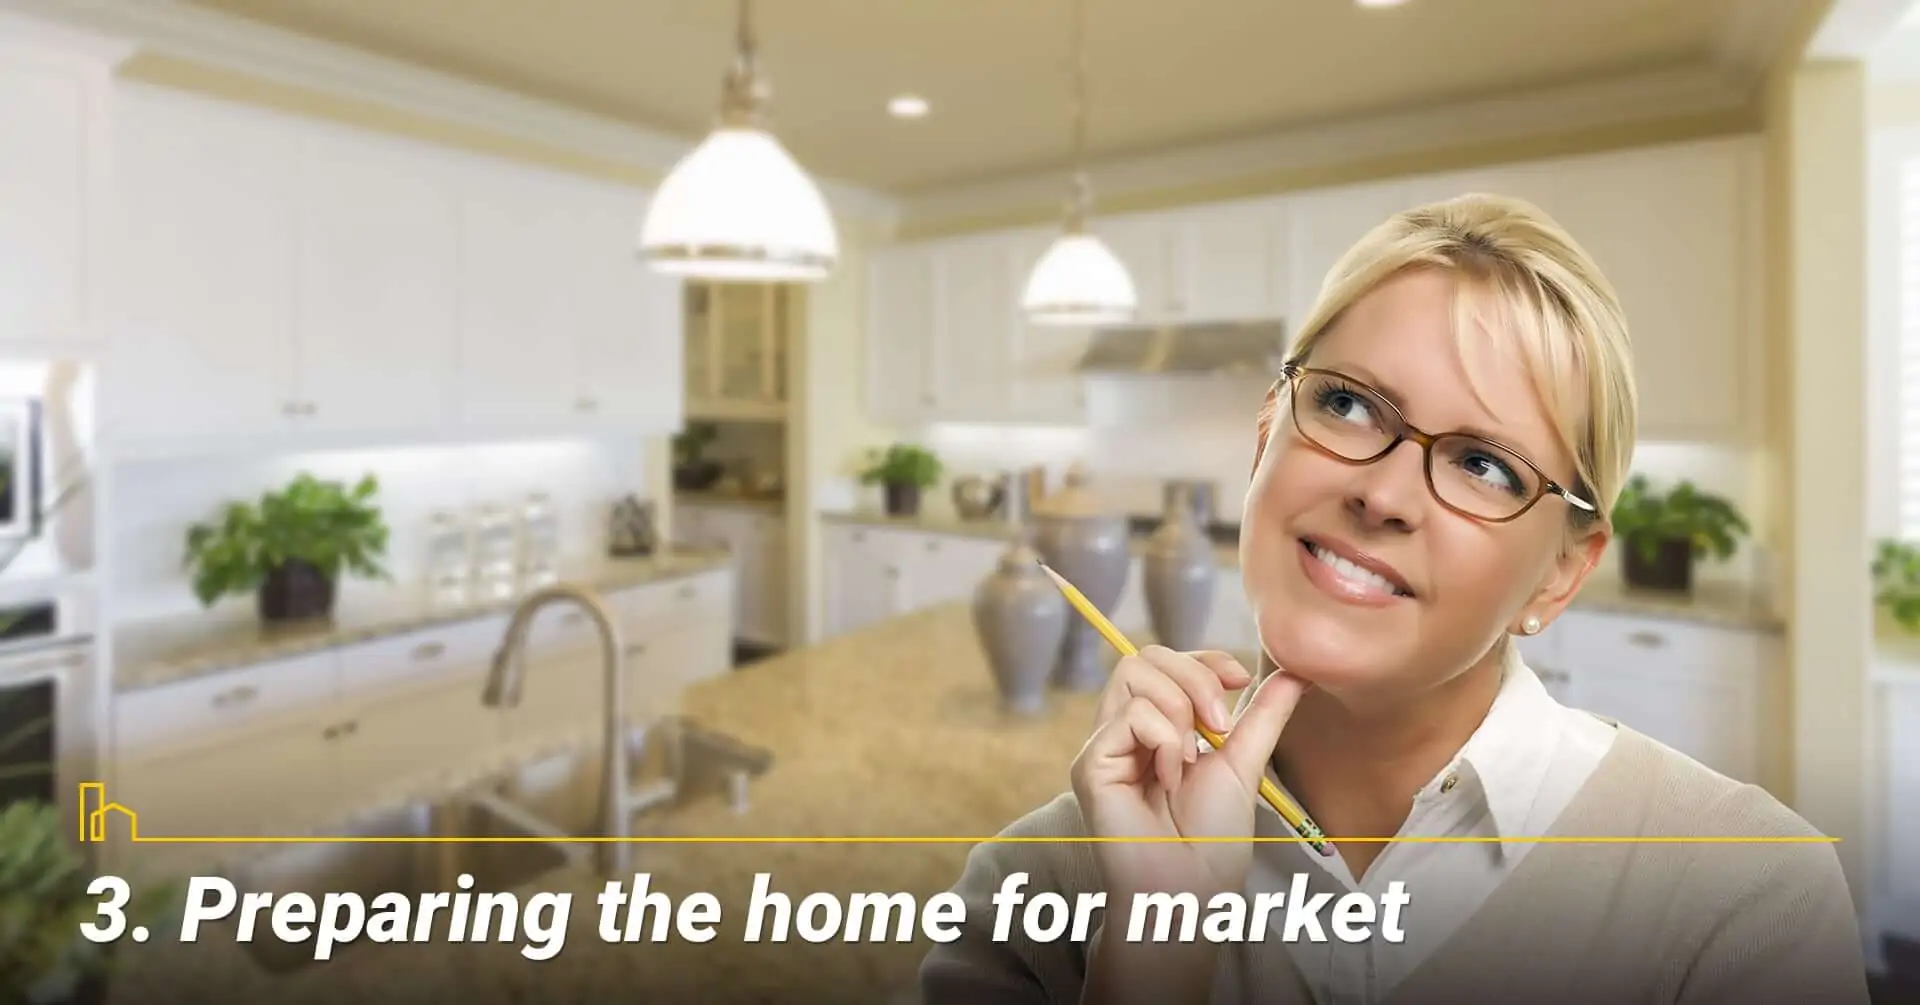 Preparing the home for market, get your home ready for listing